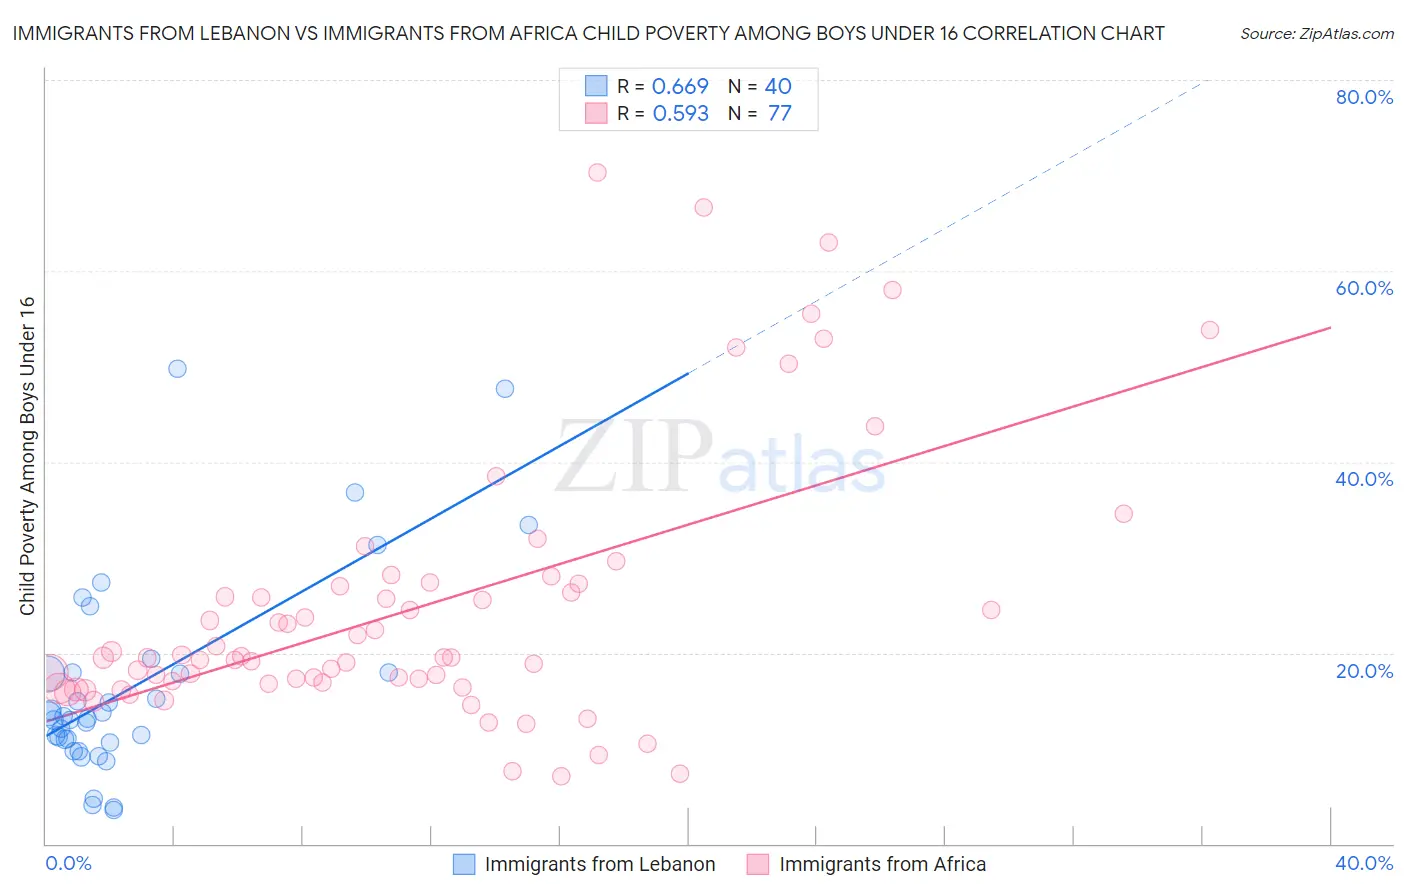 Immigrants from Lebanon vs Immigrants from Africa Child Poverty Among Boys Under 16